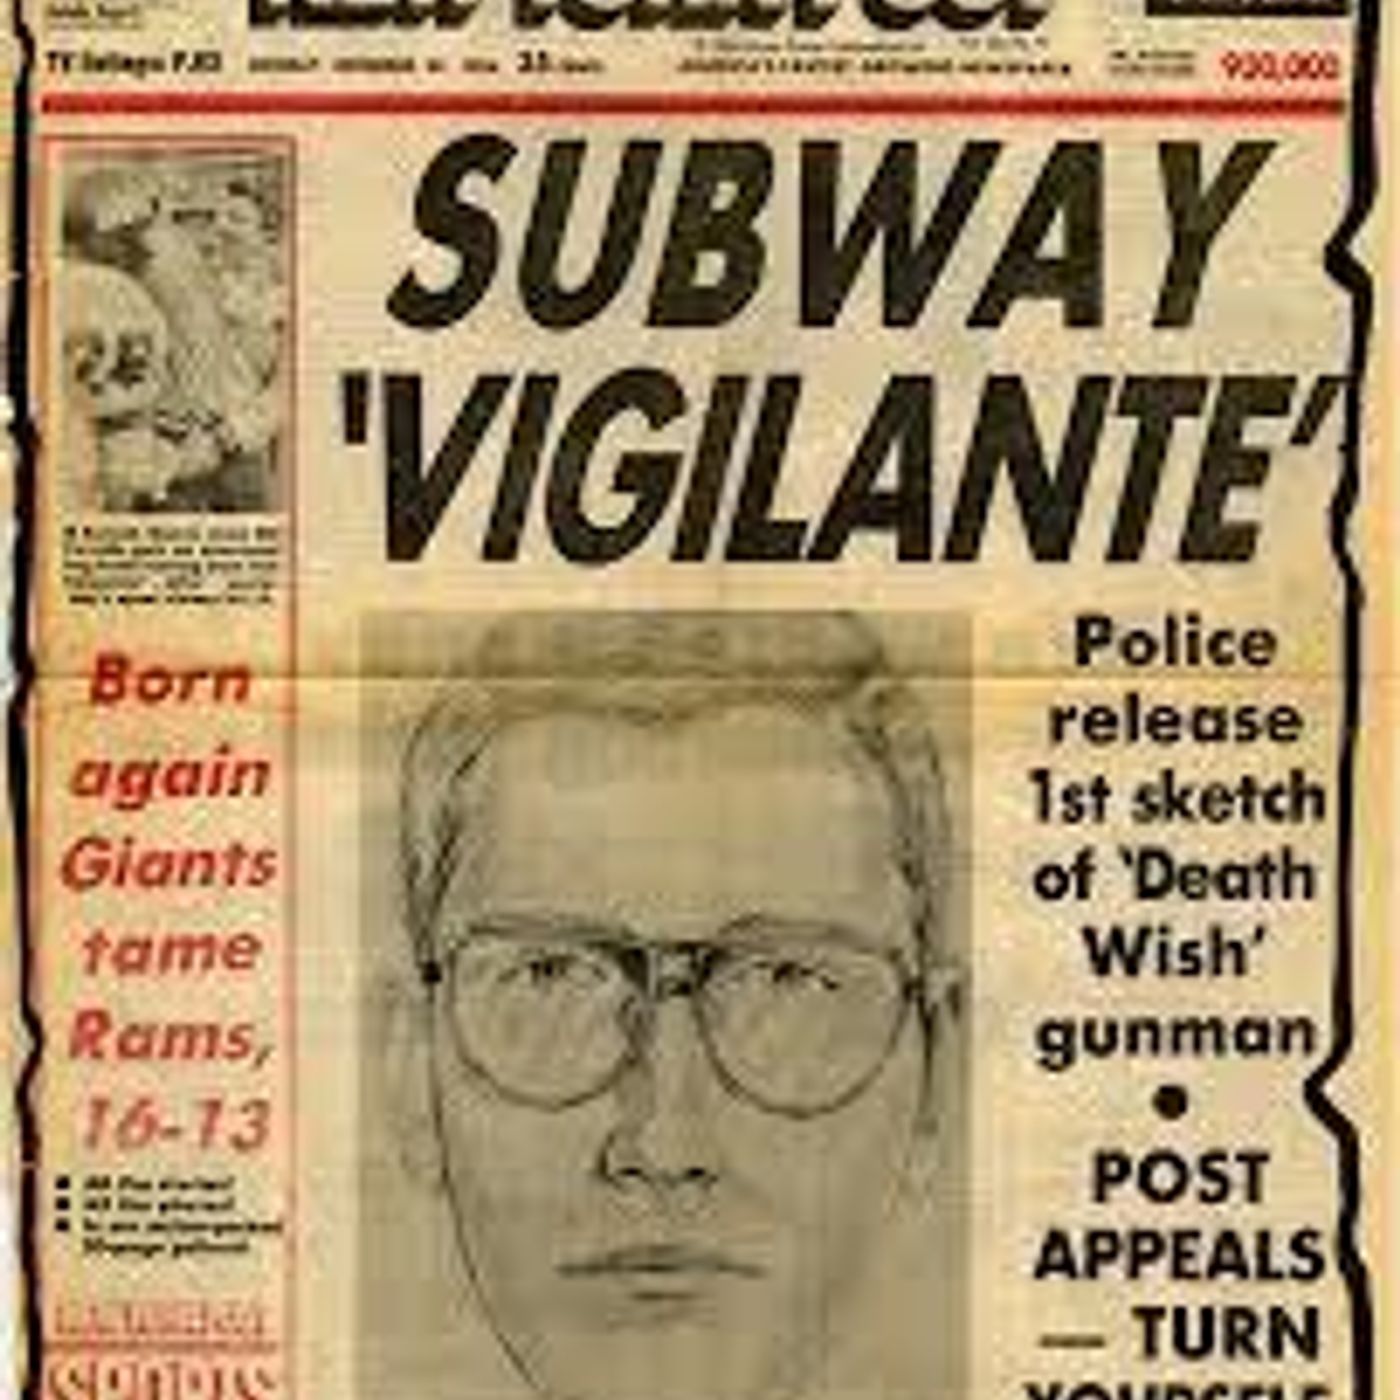 141: The Subway Vigilante (Trial By Media Ep. 2) by True Crime Obsessed